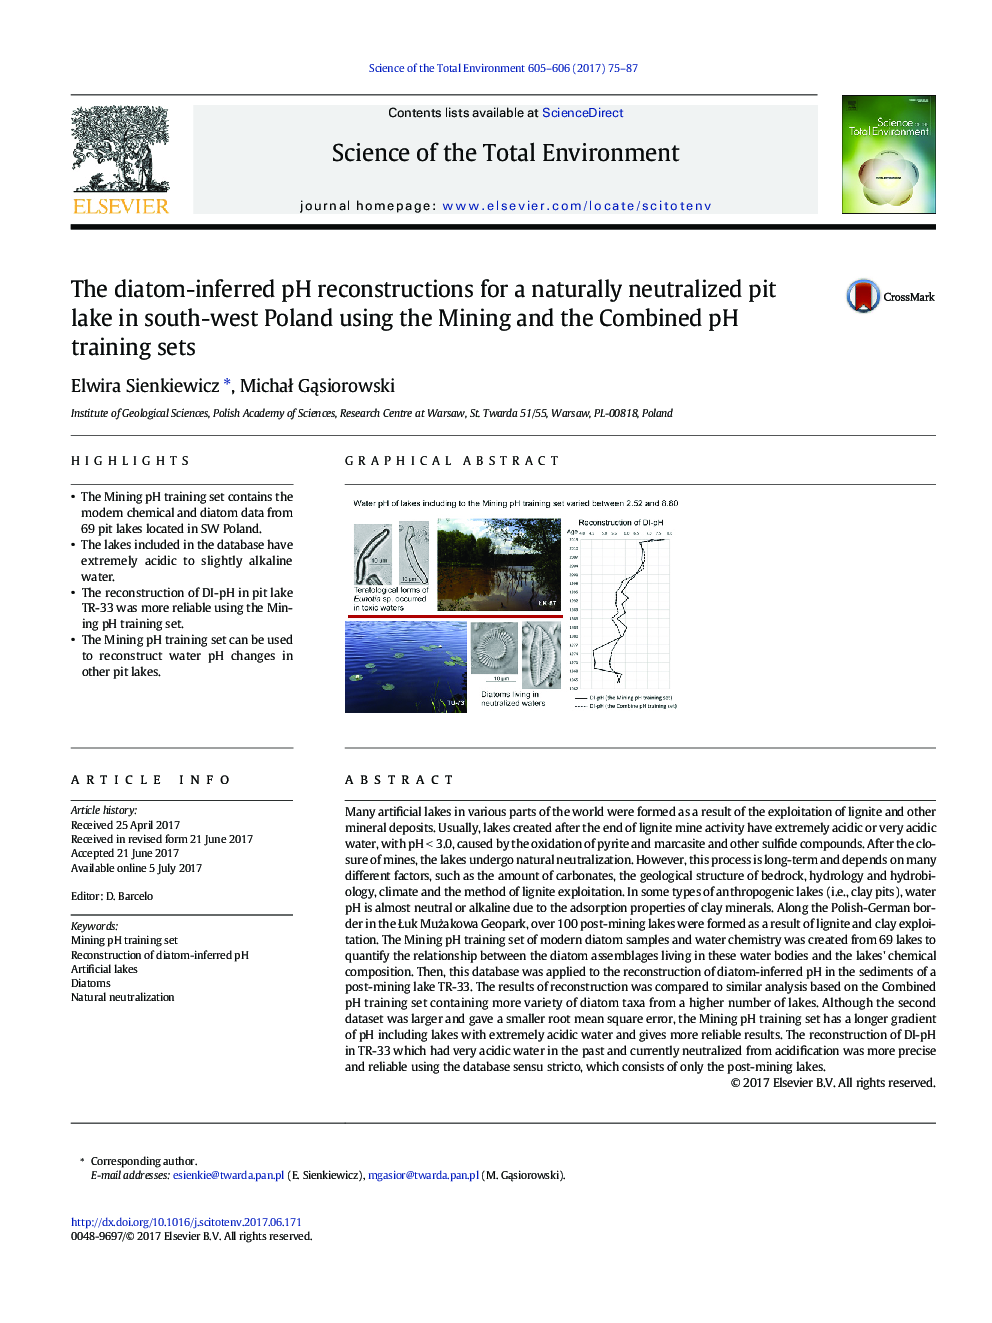 The diatom-inferred pH reconstructions for a naturally neutralized pit lake in south-west Poland using the Mining and the Combined pH training sets